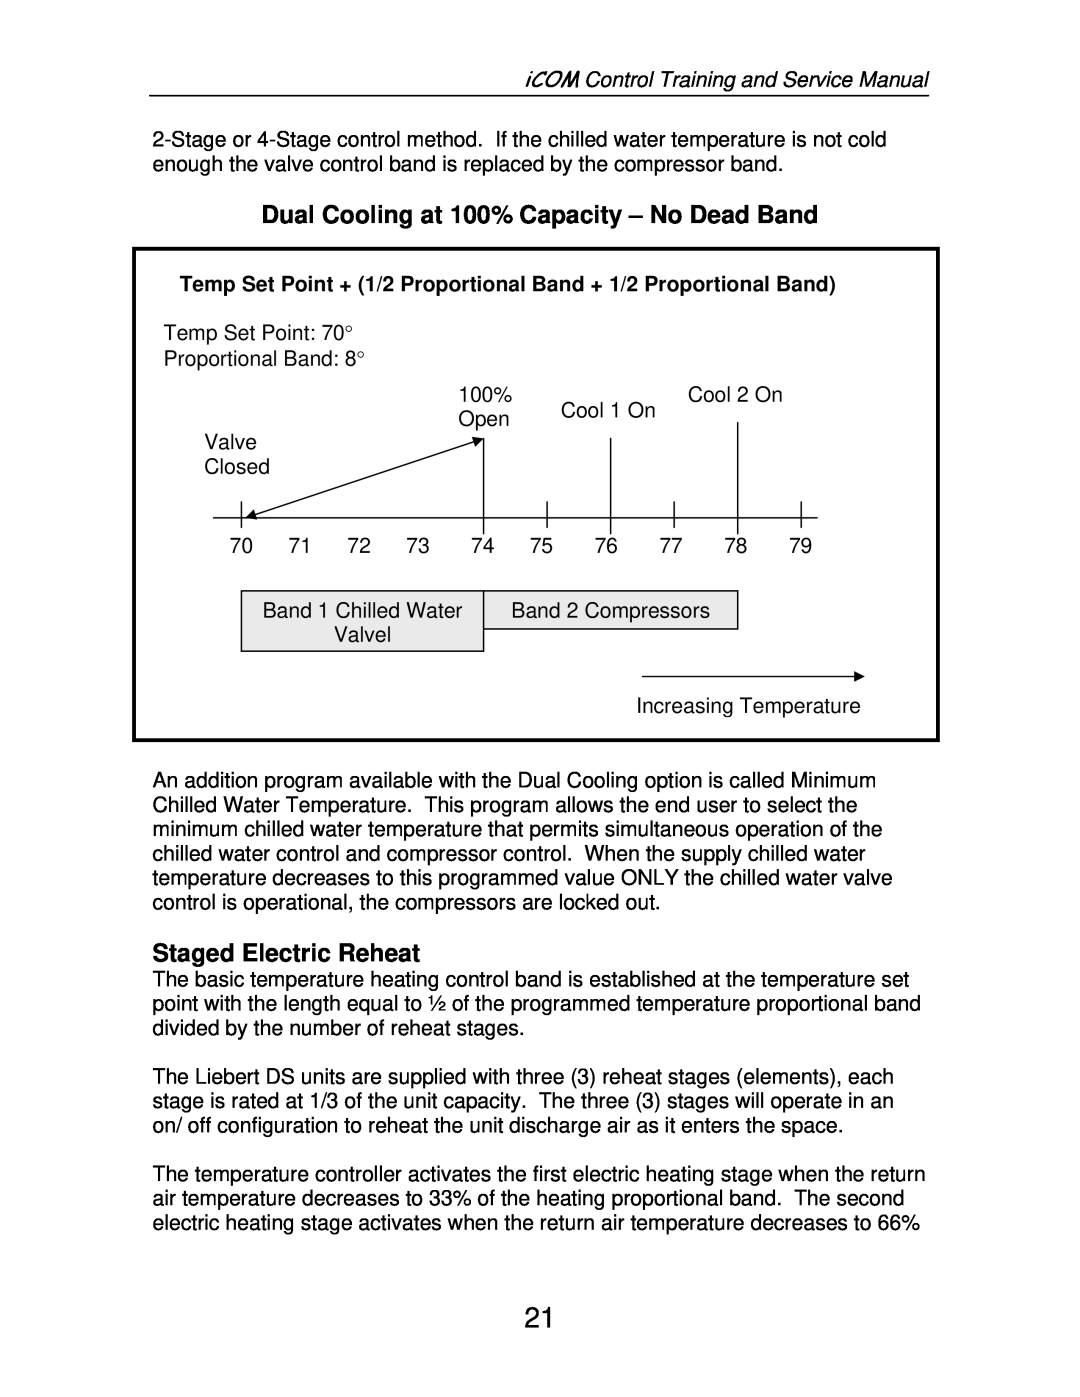 Liebert TM-10098 service manual Dual Cooling at 100% Capacity – No Dead Band, Staged Electric Reheat 